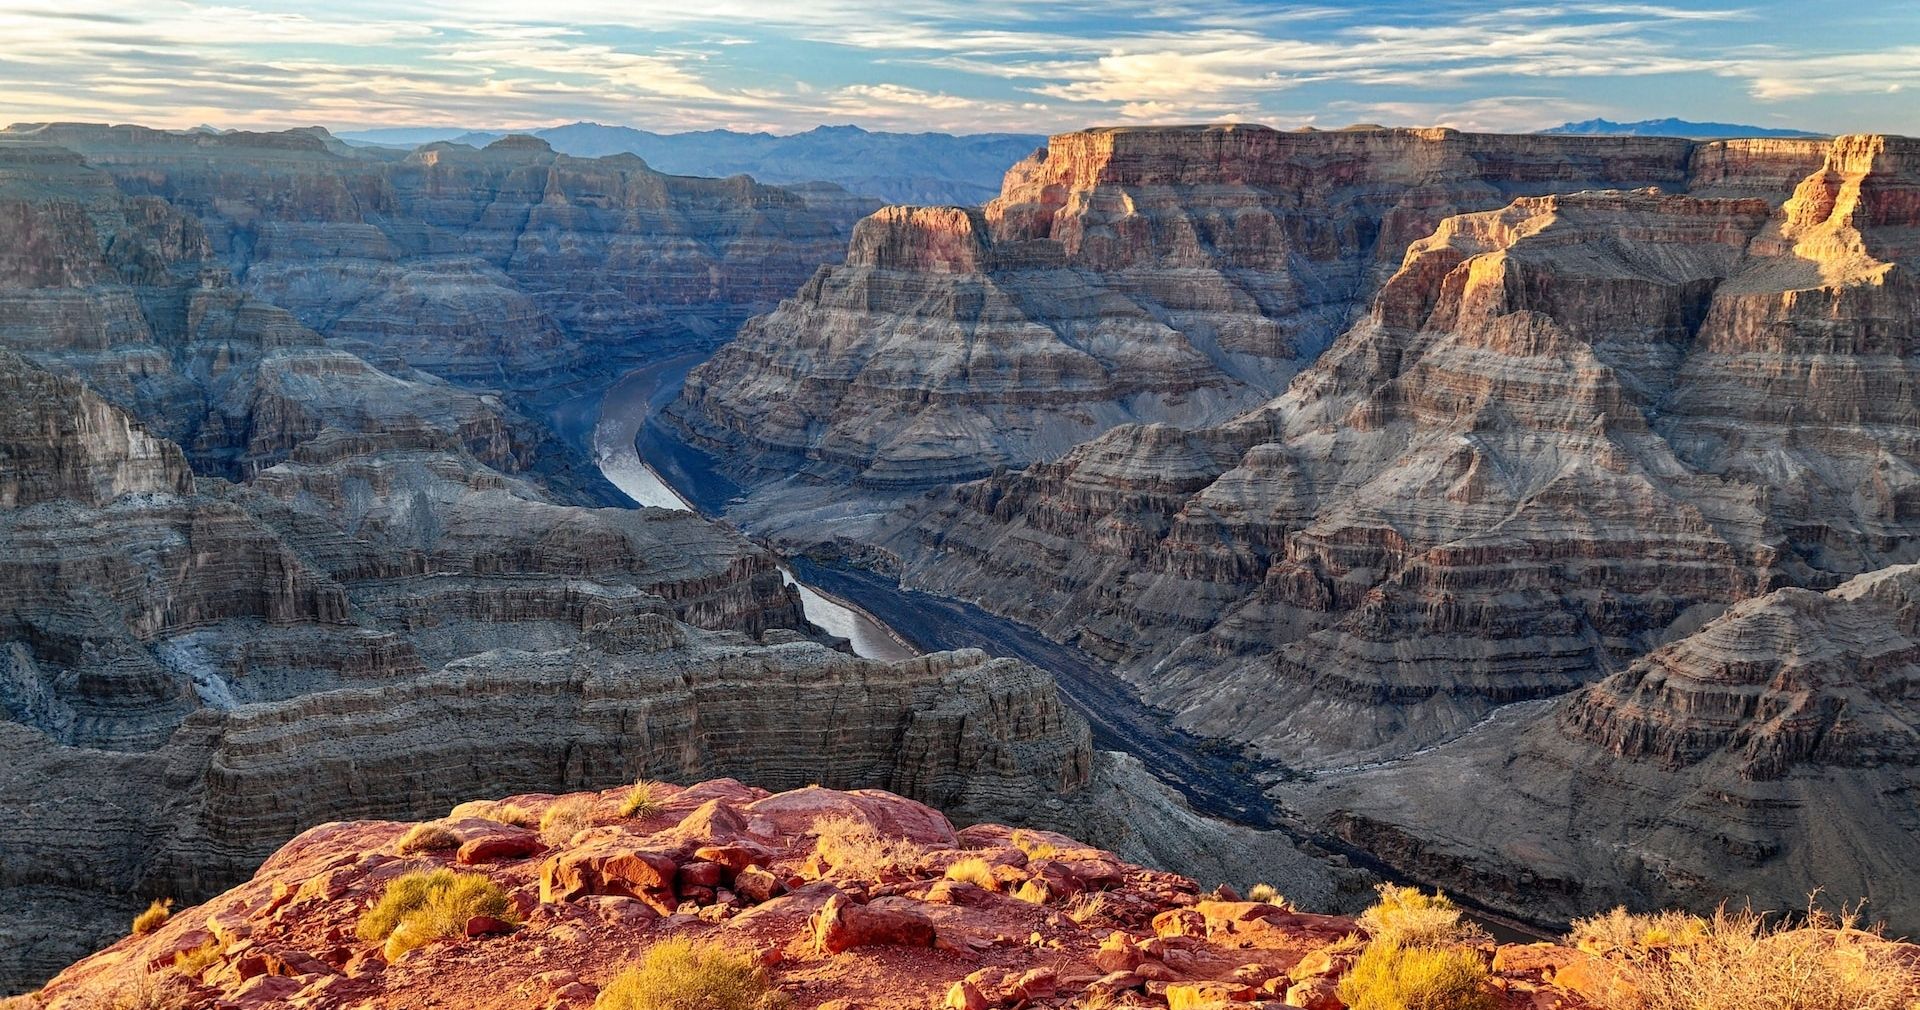 10 Safest National Parks In The US, According To The KÜHL Safety Index